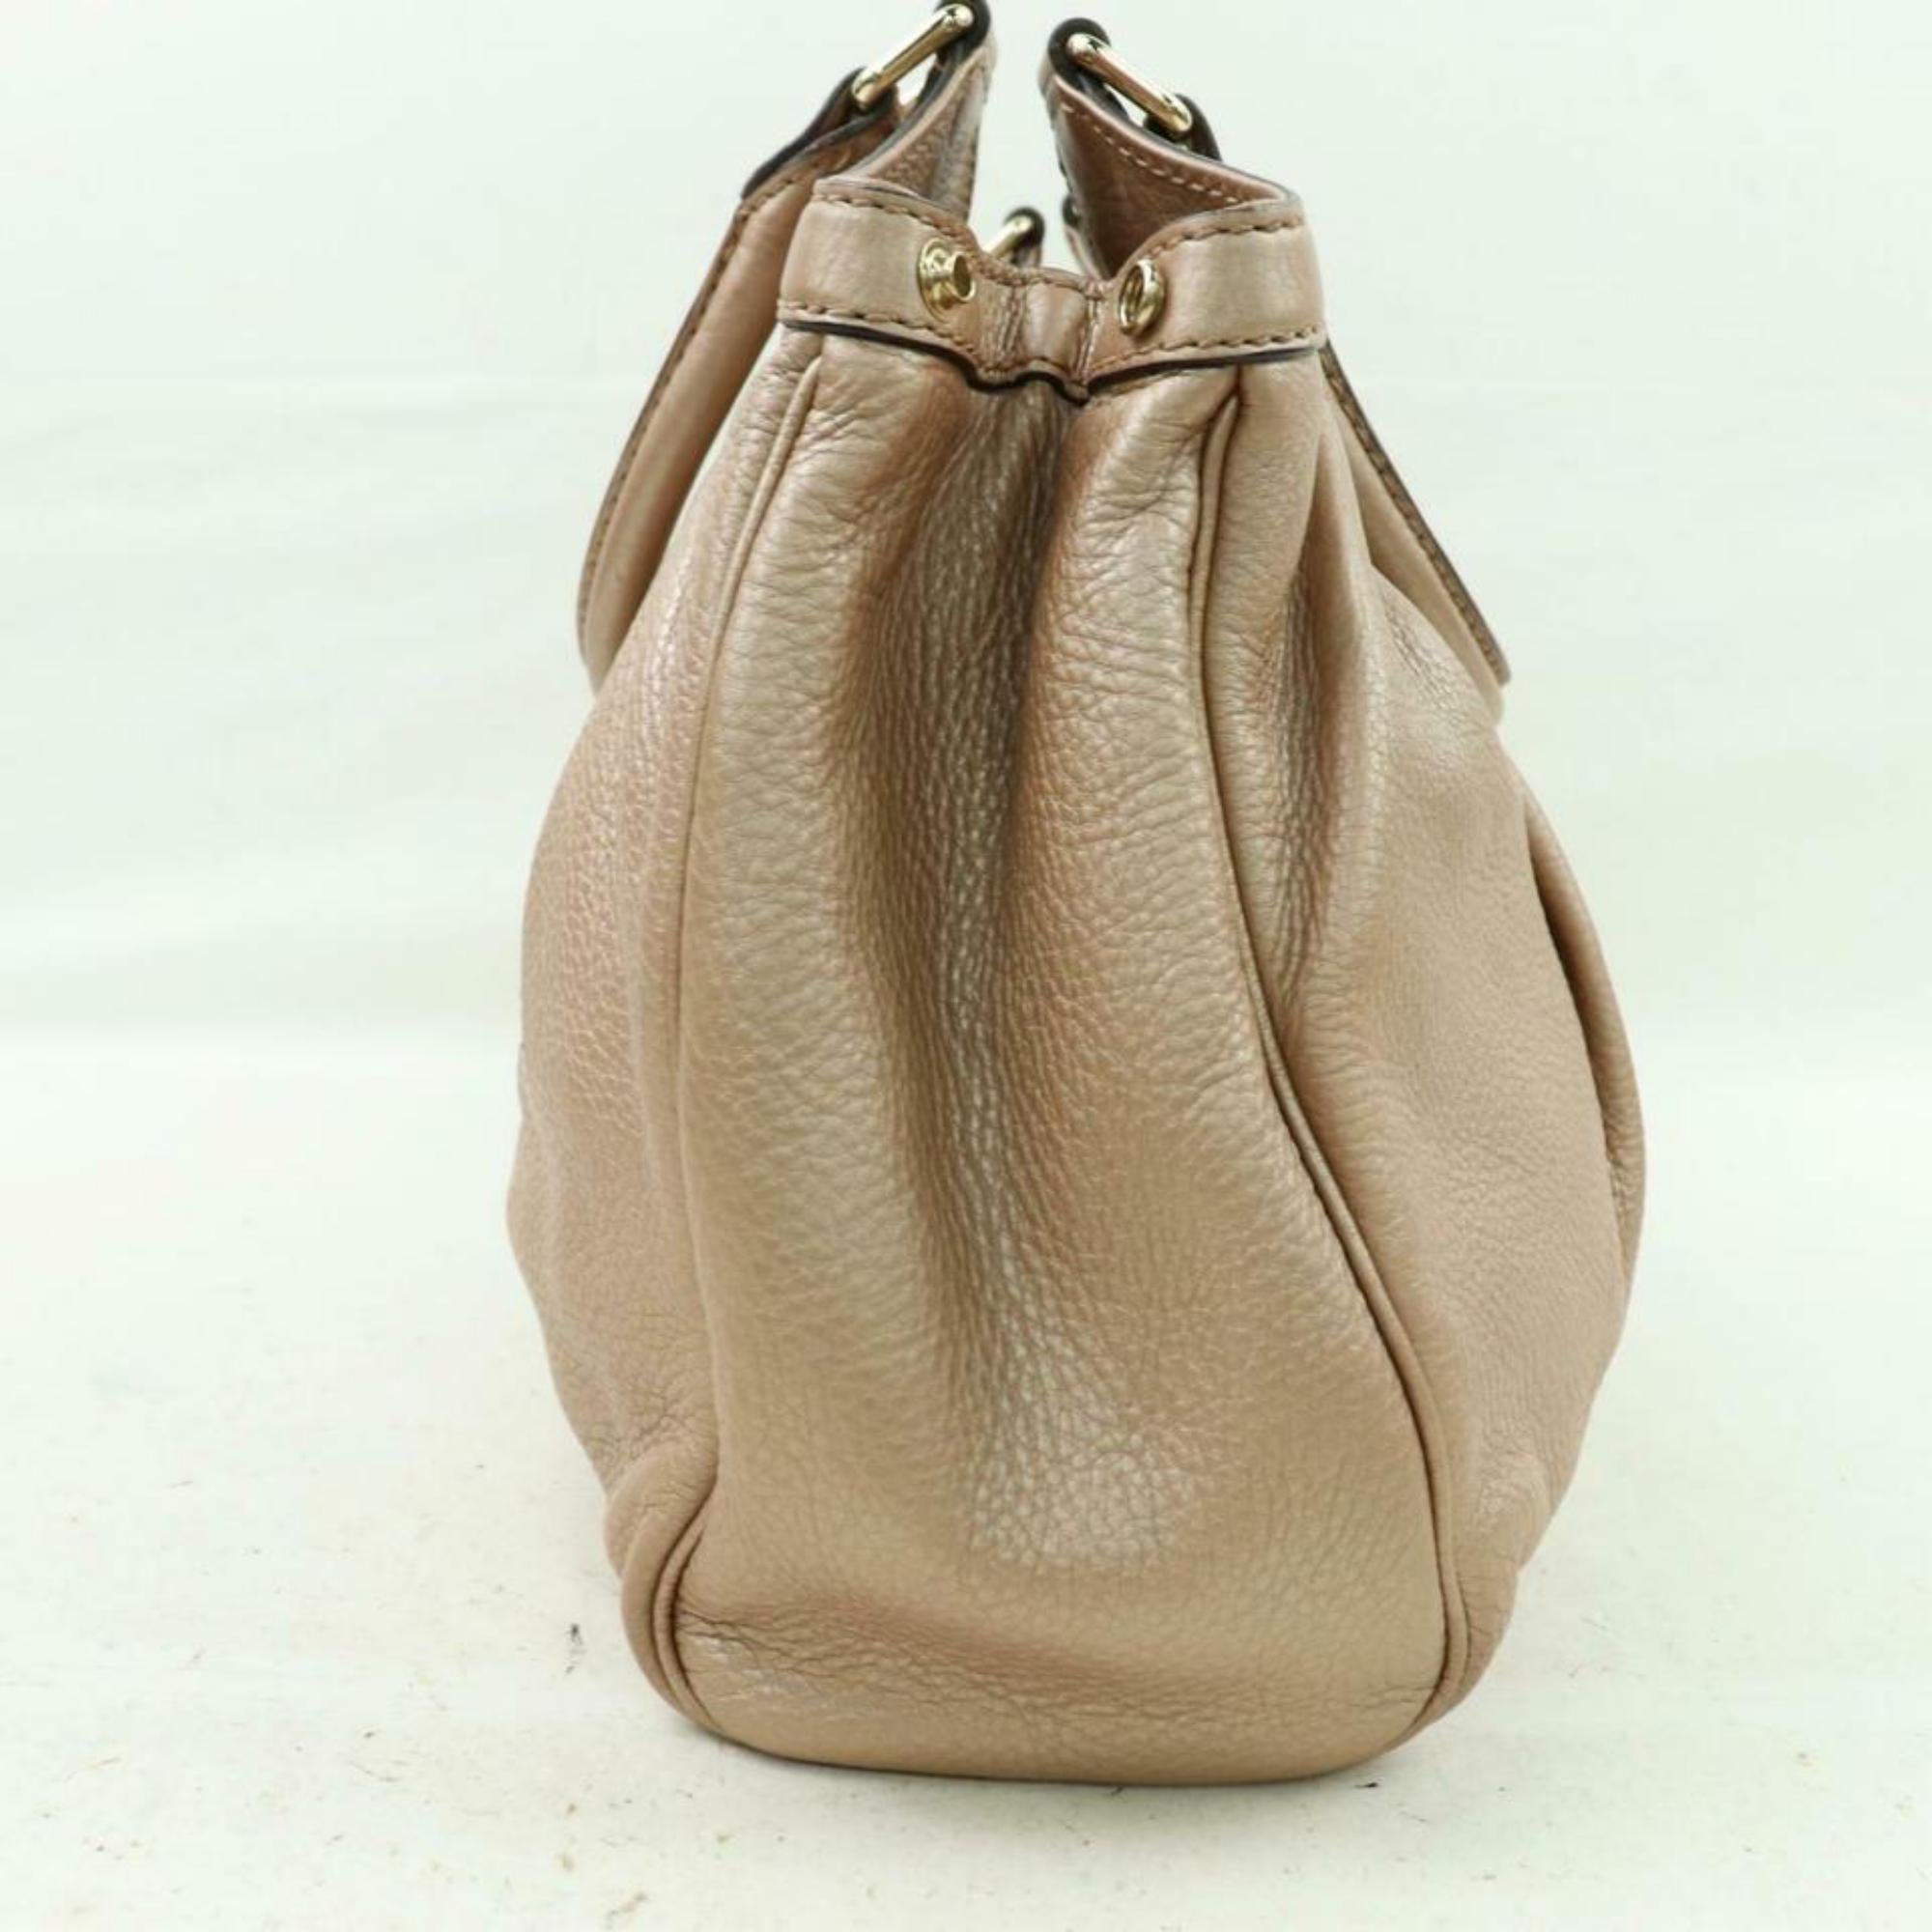 Gucci Sukey Hobo 870327 Beige Leather Satchel For Sale 4